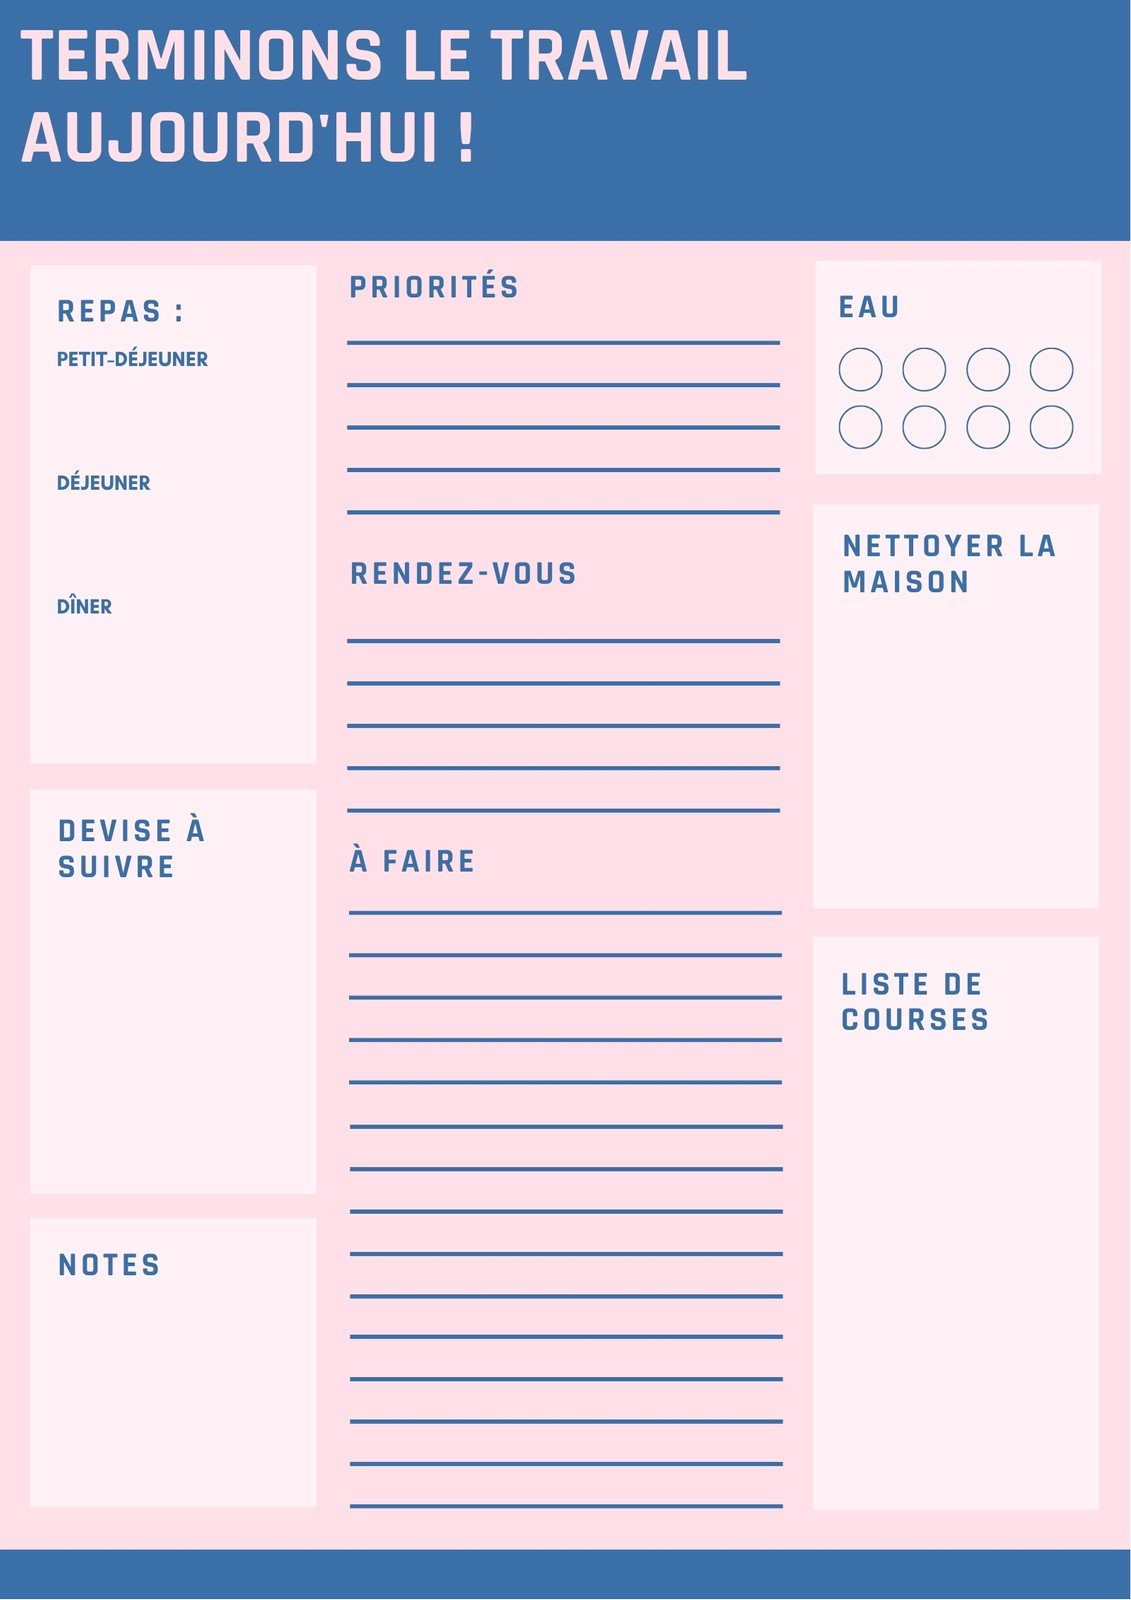  Agenda 2023 Journalier Rose pour Femme (French Edition